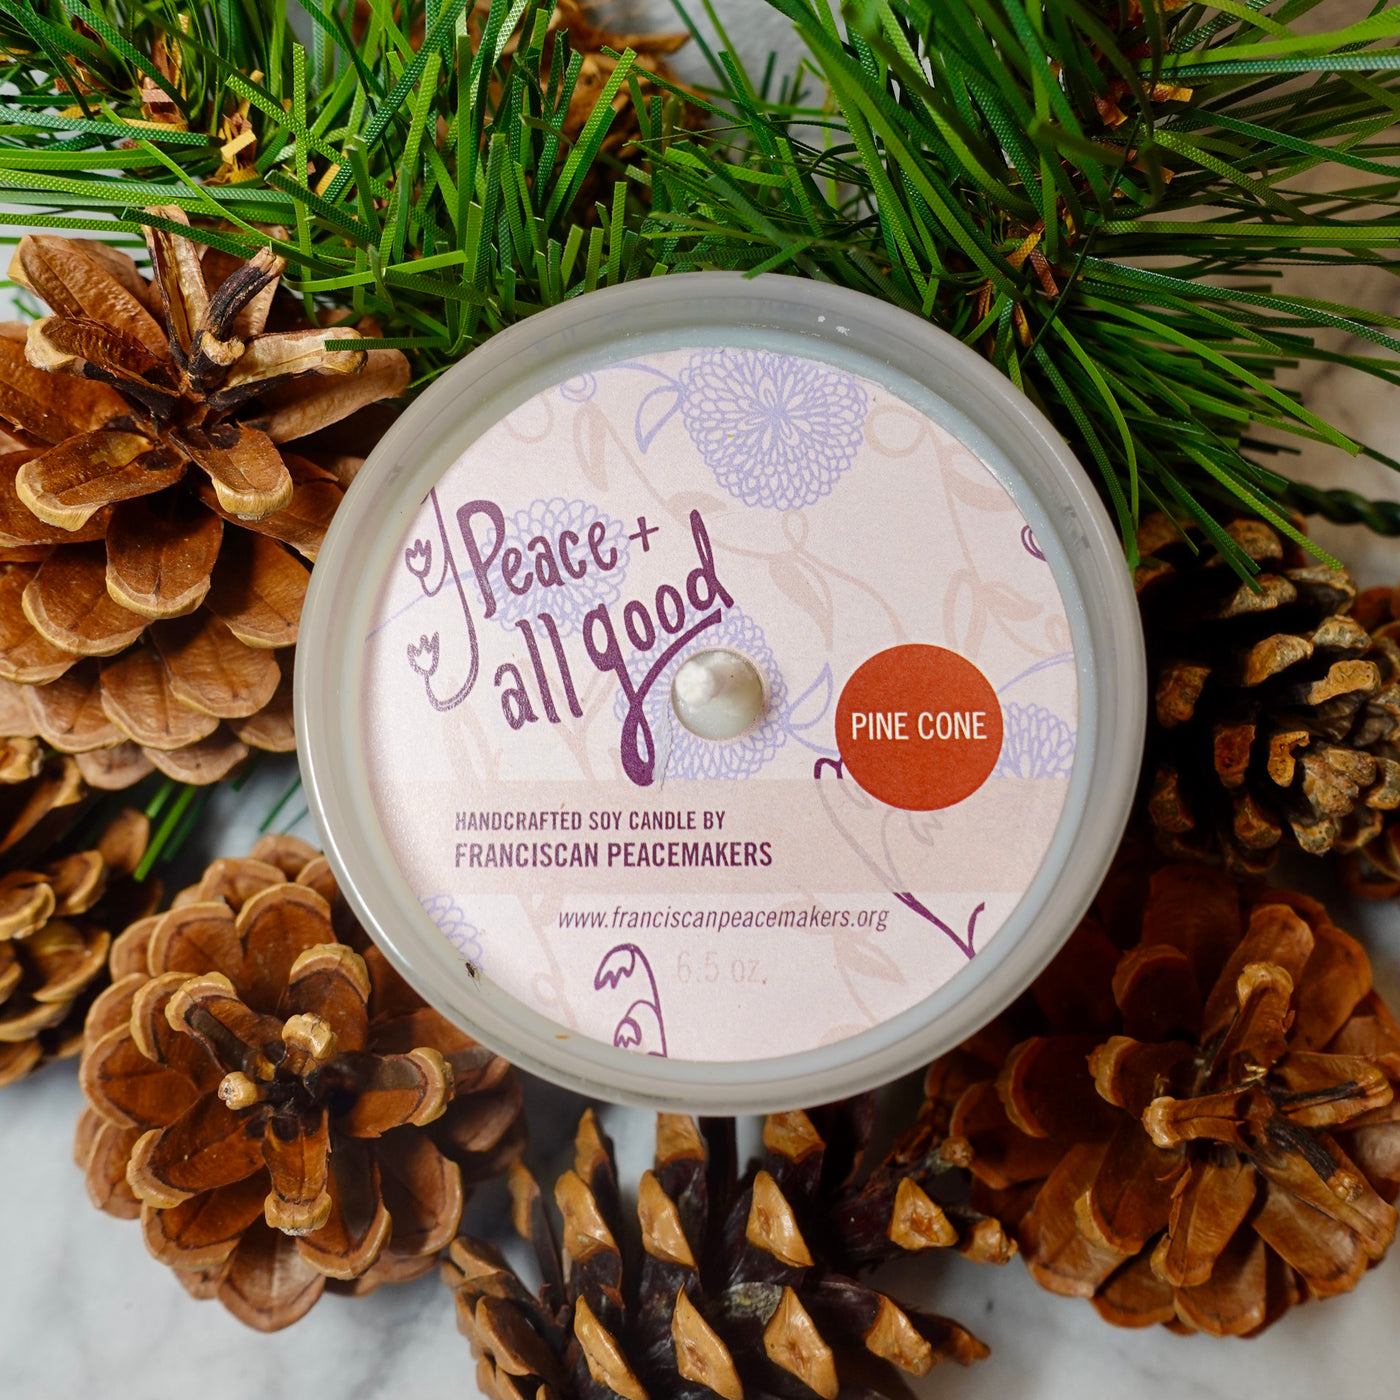 Pinecone Soy Candle - 6.5 oz